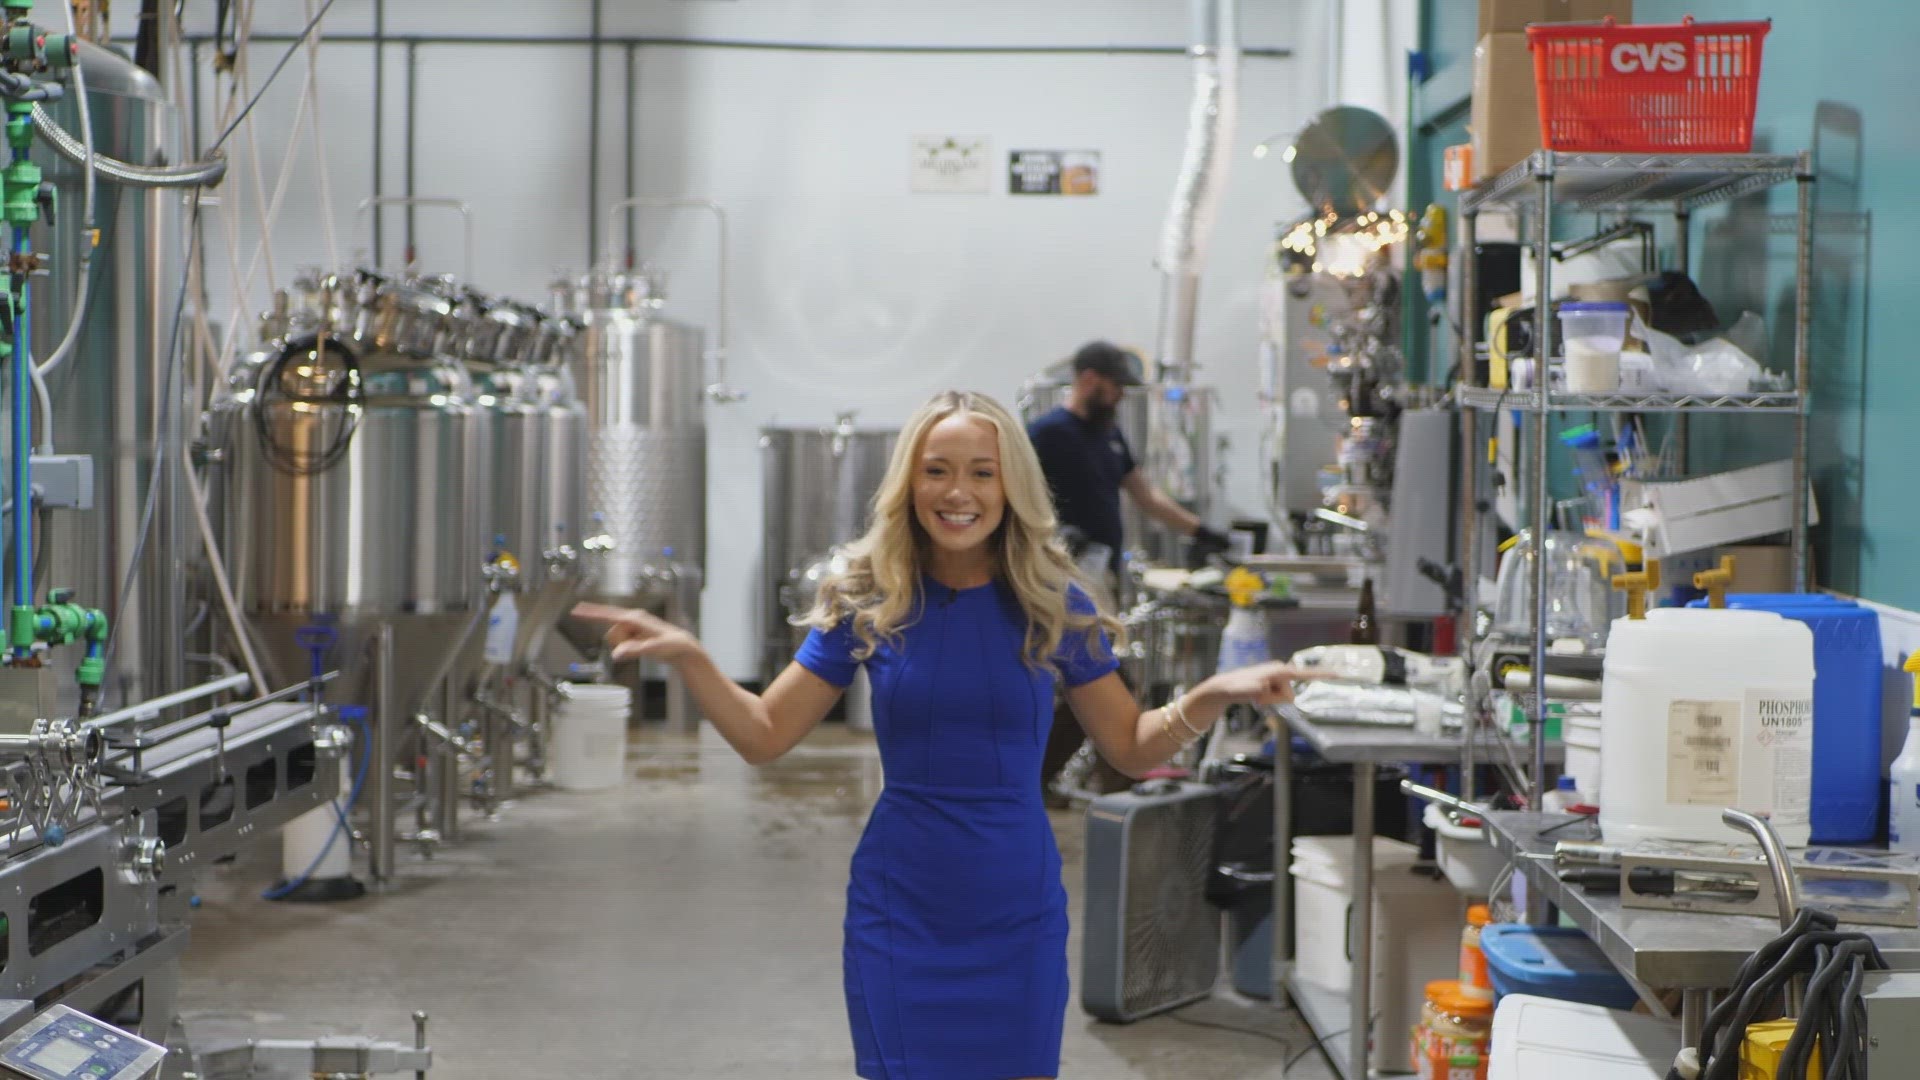 Meteorologist Samantha Jacques takes part in the brewing process of The Mitten's 13 Weatherball Red Ale to celebrate the Weatherball's 20th anniversary